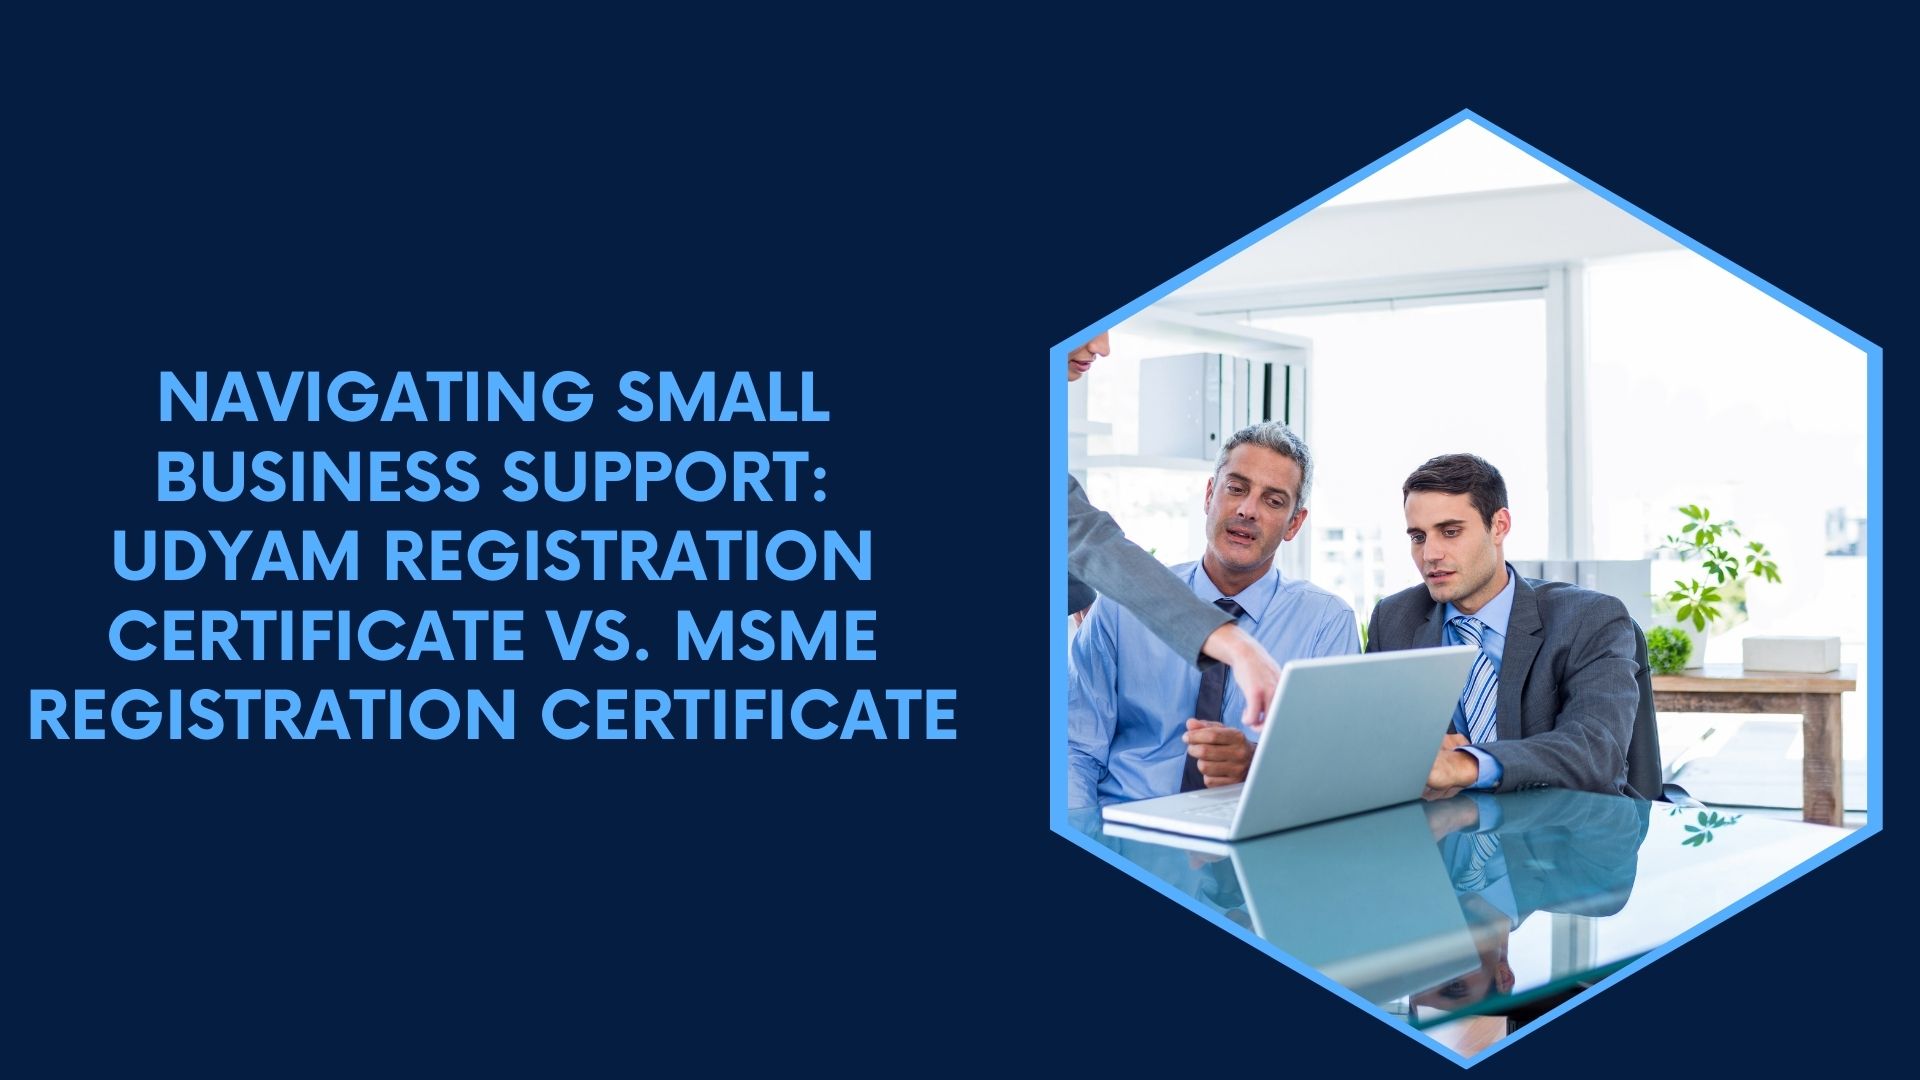 Navigating Small Business Support: Udyam Registration Certificate vs. MSME Registration Certificate